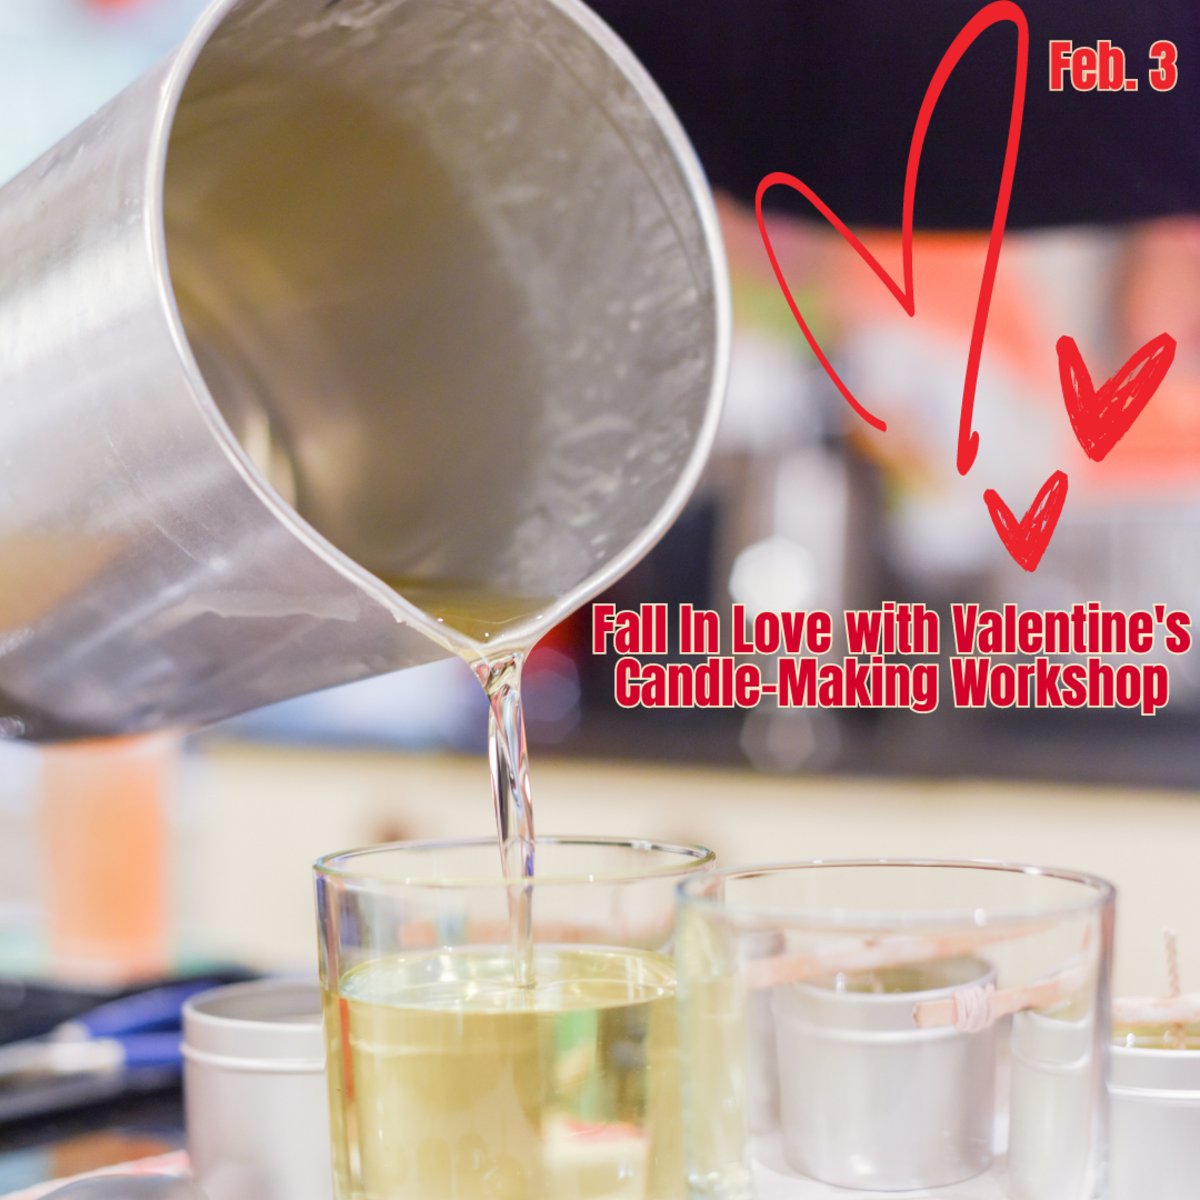 Looking for a fun and creative activity? Join the Fall In Love with Valentine's #CandleMakingWorkshop this Saturday and learn all the basics of candle making. You can even enjoy some #mocktails and #charcuterieboards! For more details, visit bit.ly/421XU7m.